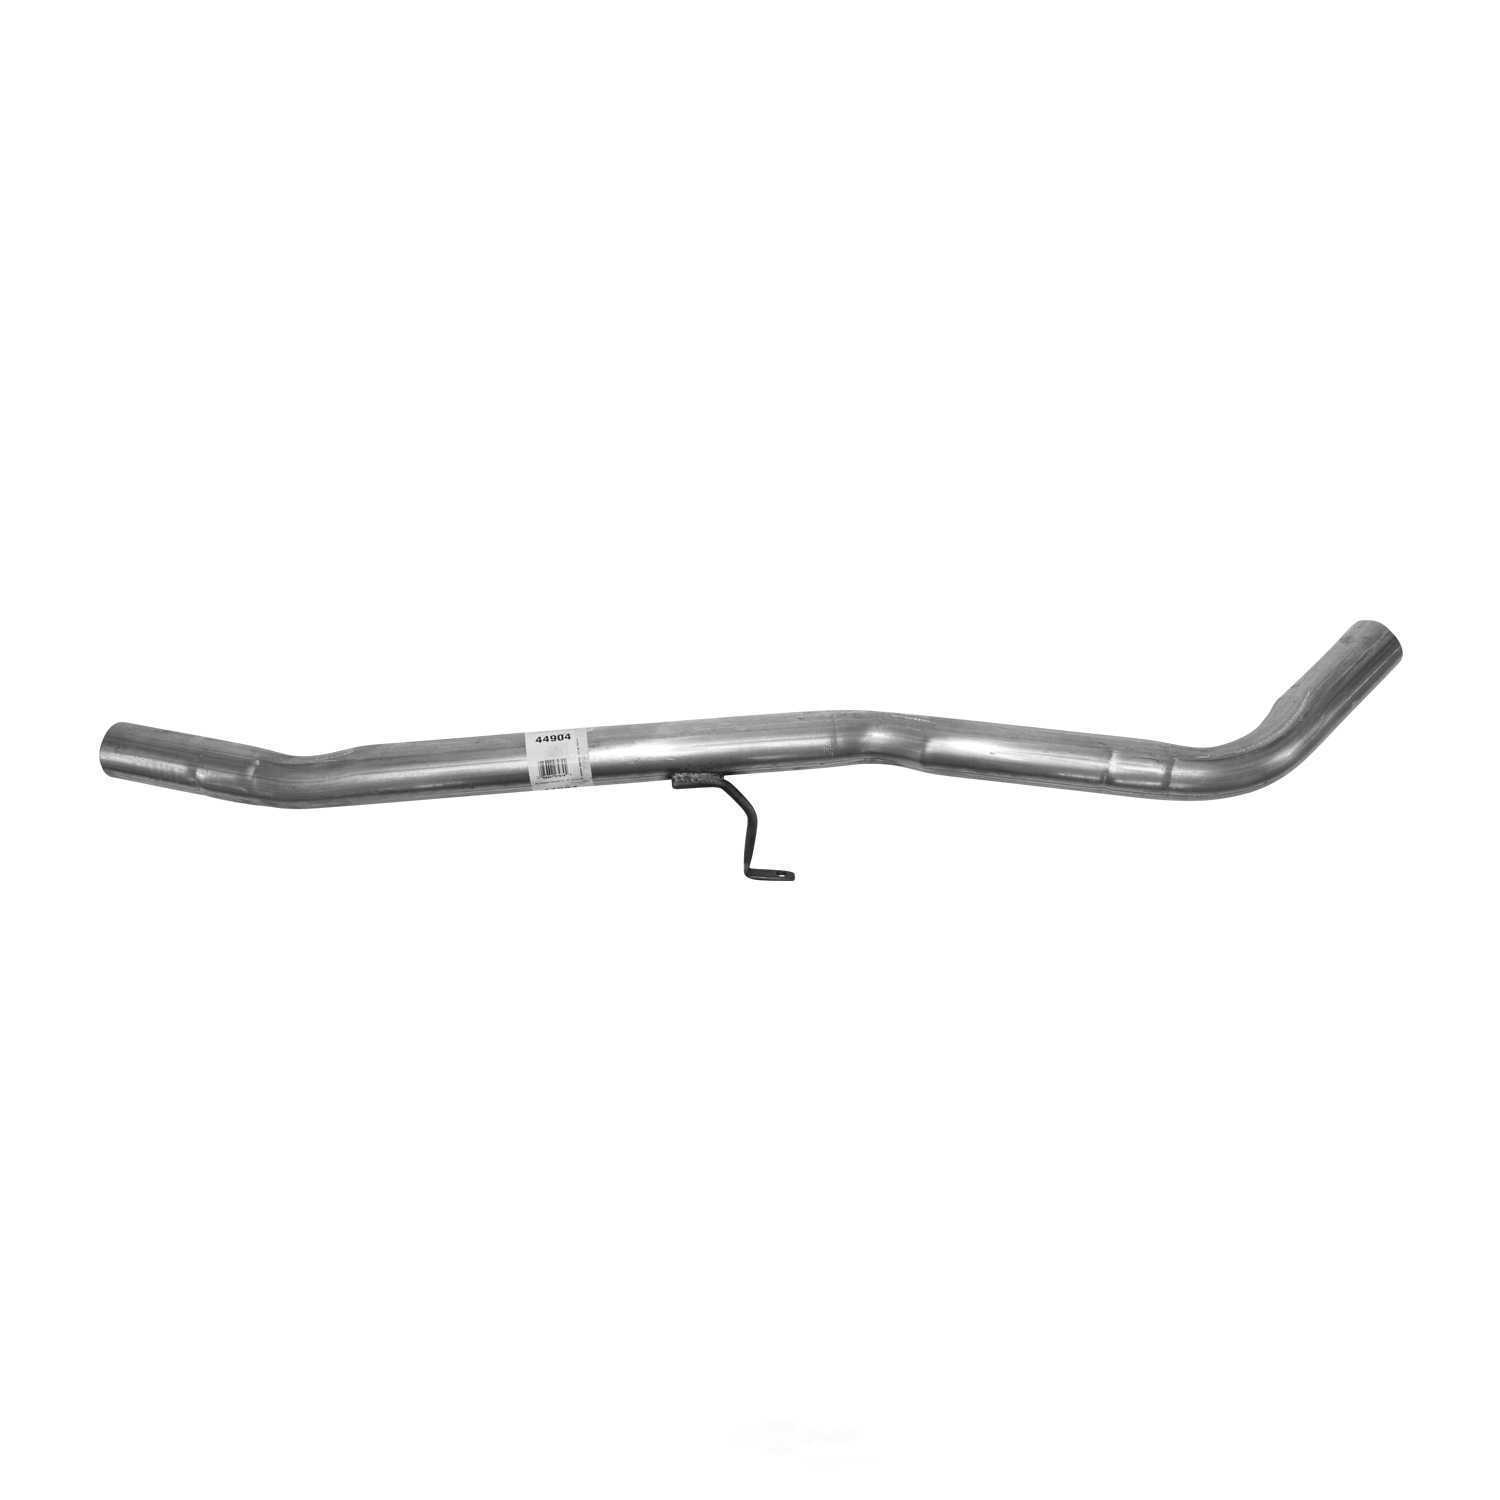 Exhaust Tail Pipe AP Exhaust 44904 fits 2003 Nissan Xterra 3.3L-V6